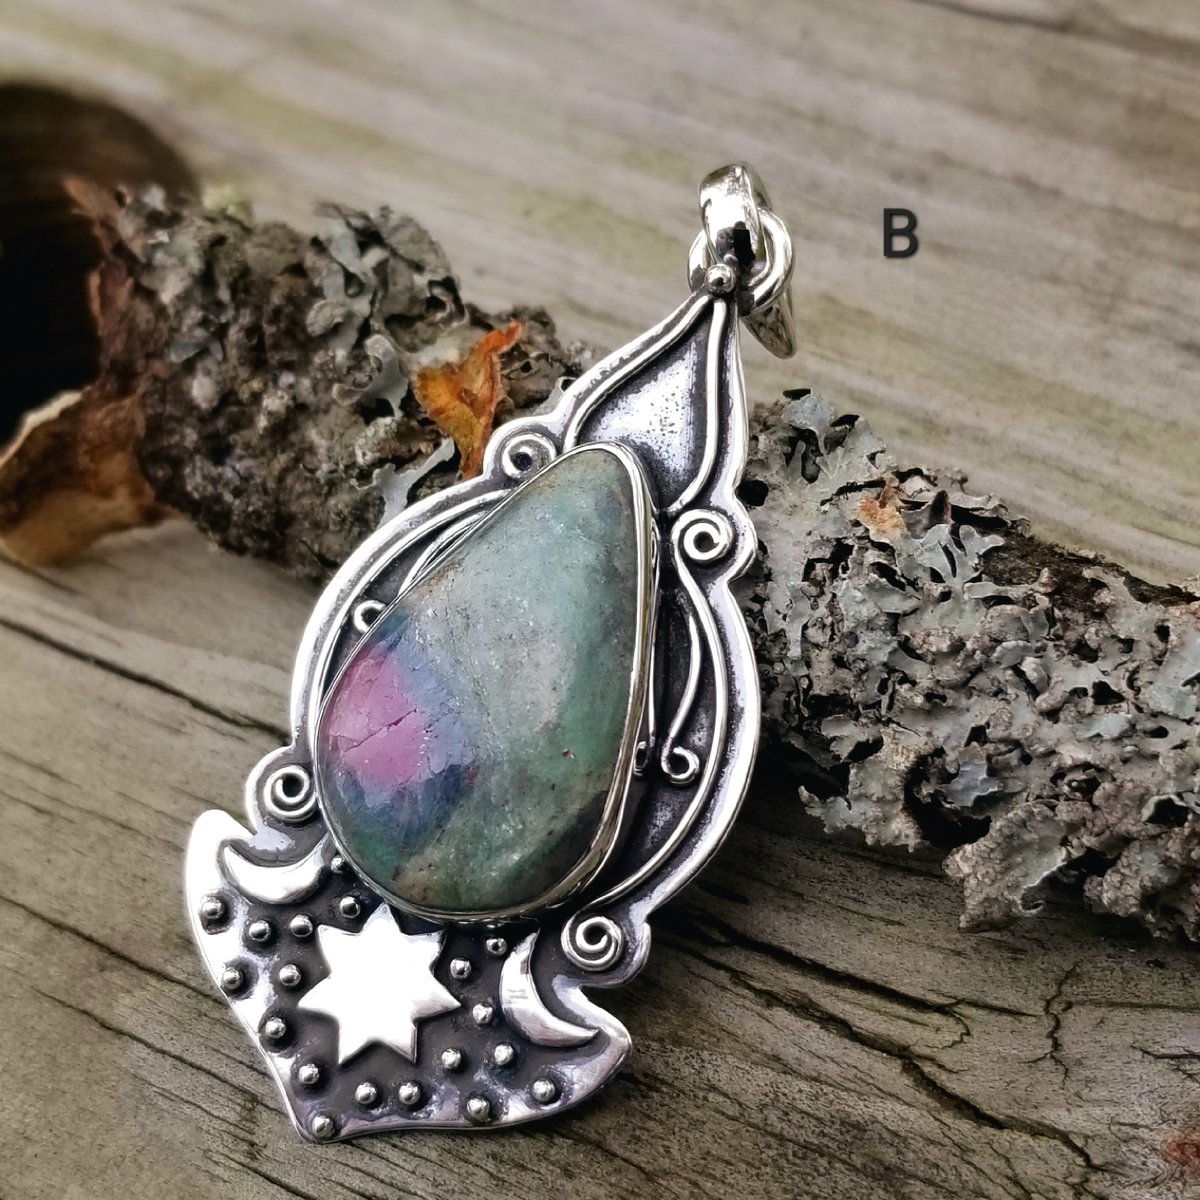 Image of Romany Boho - Ruby Fuchsite Pendant in Sterling Silver